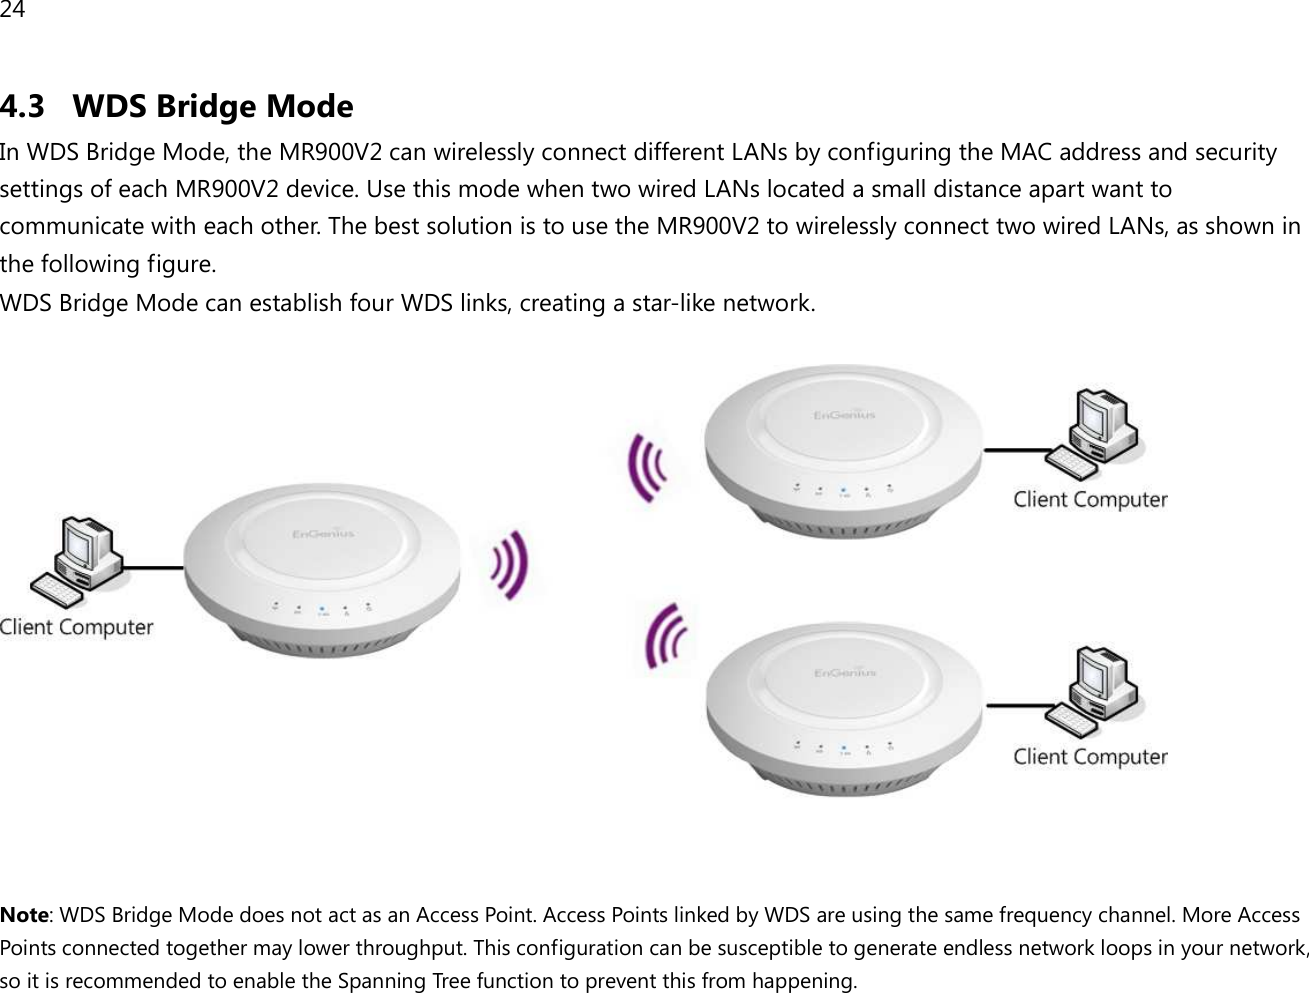 24  4.3 WDS Bridge Mode In WDS Bridge Mode, the MR900V2 can wirelessly connect different LANs by configuring the MAC address and security settings of each MR900V2 device. Use this mode when two wired LANs located a small distance apart want to communicate with each other. The best solution is to use the MR900V2 to wirelessly connect two wired LANs, as shown in the following figure.  WDS Bridge Mode can establish four WDS links, creating a star-like network.     Note: WDS Bridge Mode does not act as an Access Point. Access Points linked by WDS are using the same frequency channel. More Access Points connected together may lower throughput. This configuration can be susceptible to generate endless network loops in your network, so it is recommended to enable the Spanning Tree function to prevent this from happening. 